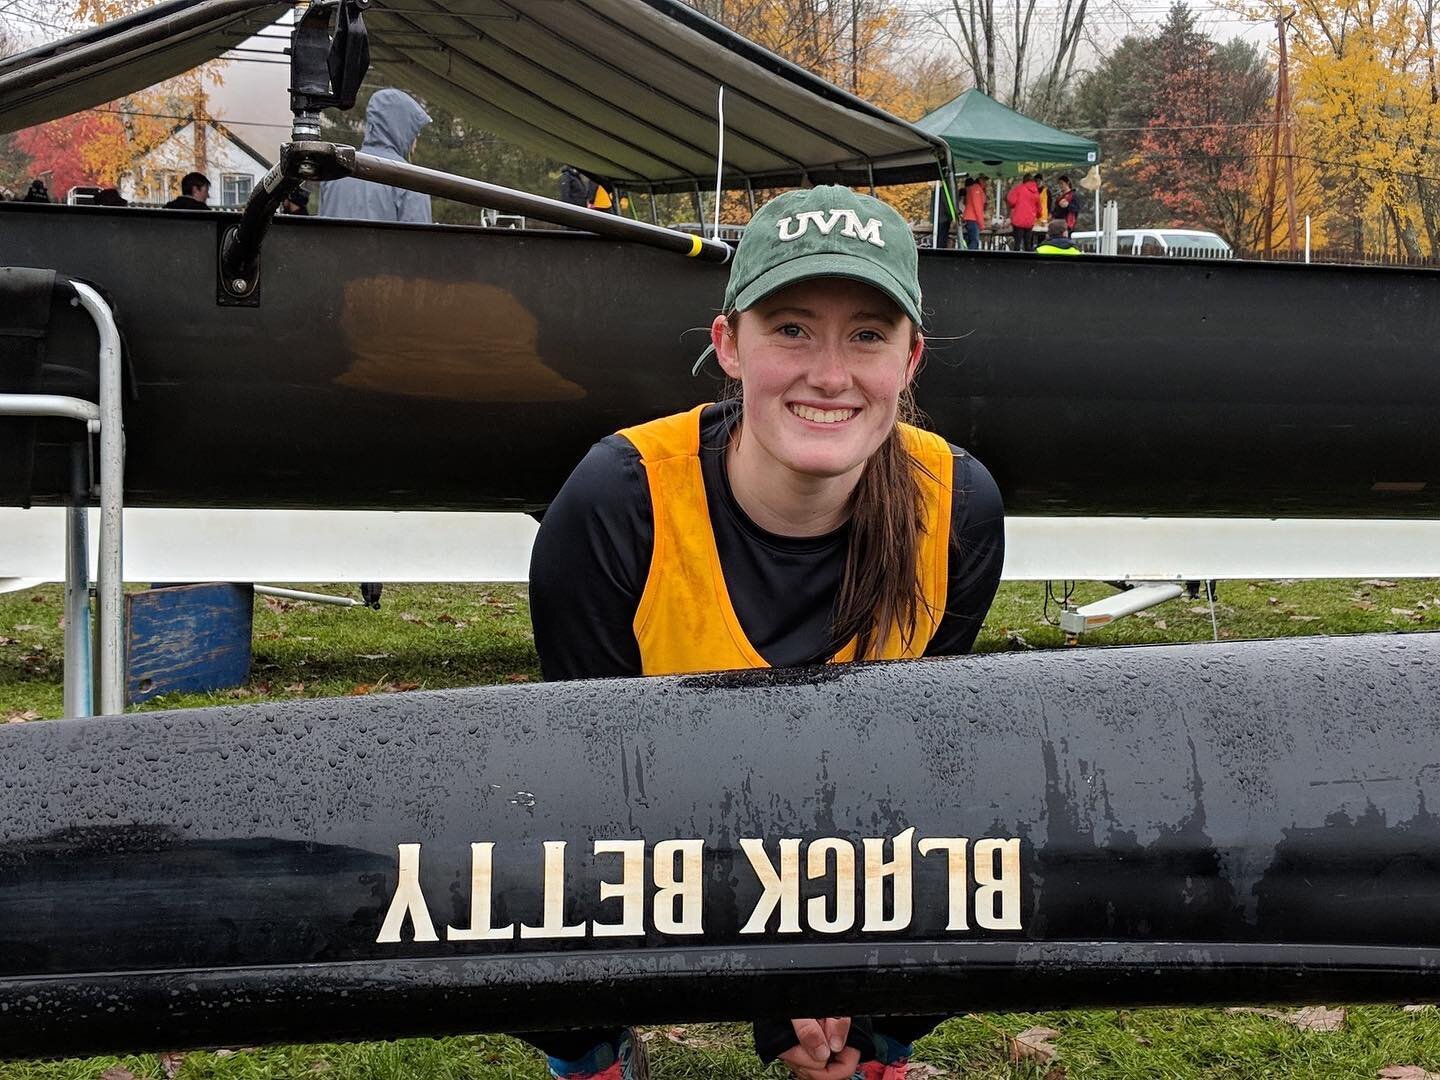 Our next senior shoutout goes to Sin&eacute;ad Donnelley. Sin&eacute;ad has an extensive history of rowing. Her mom rows so she grew up going to regattas and hanging out in launches with her mom&rsquo;s coaches. Sin&eacute;ad was 4 the first time she